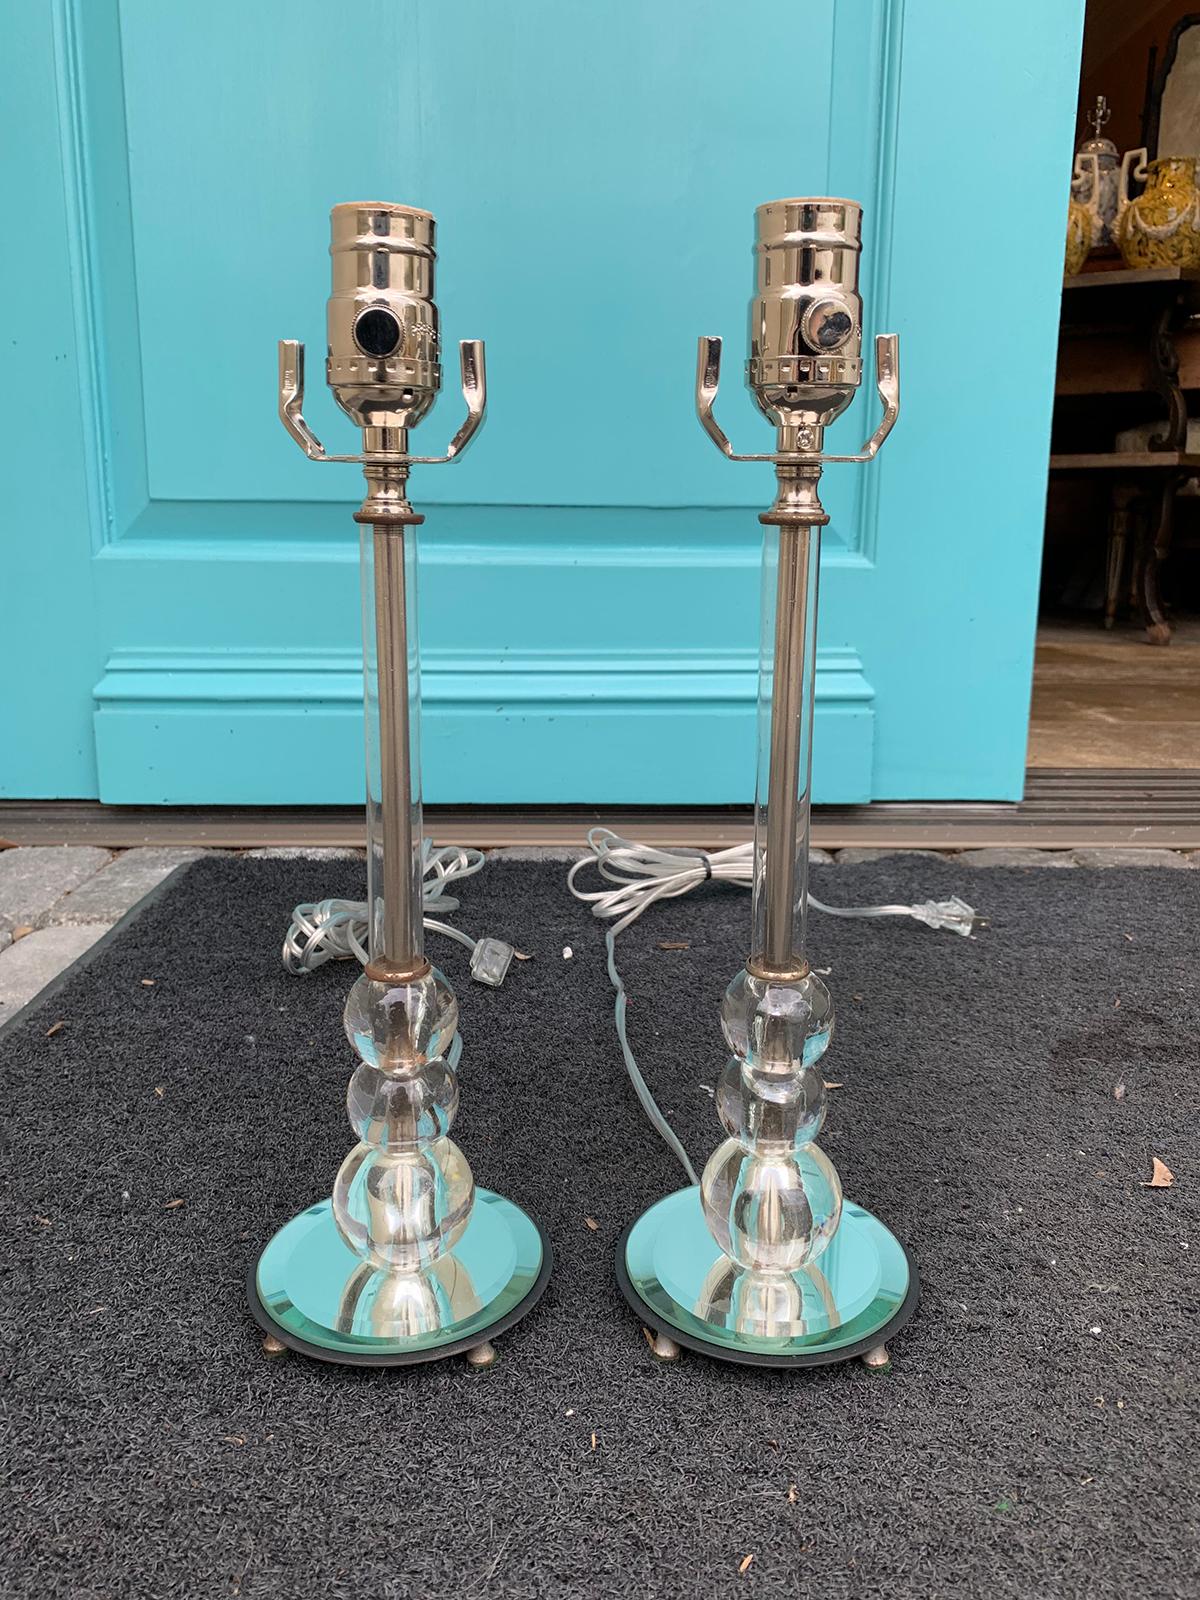 Pair of Art Deco Mirror and crystal glass dressing table lamps, circa 1920s
brand new wiring